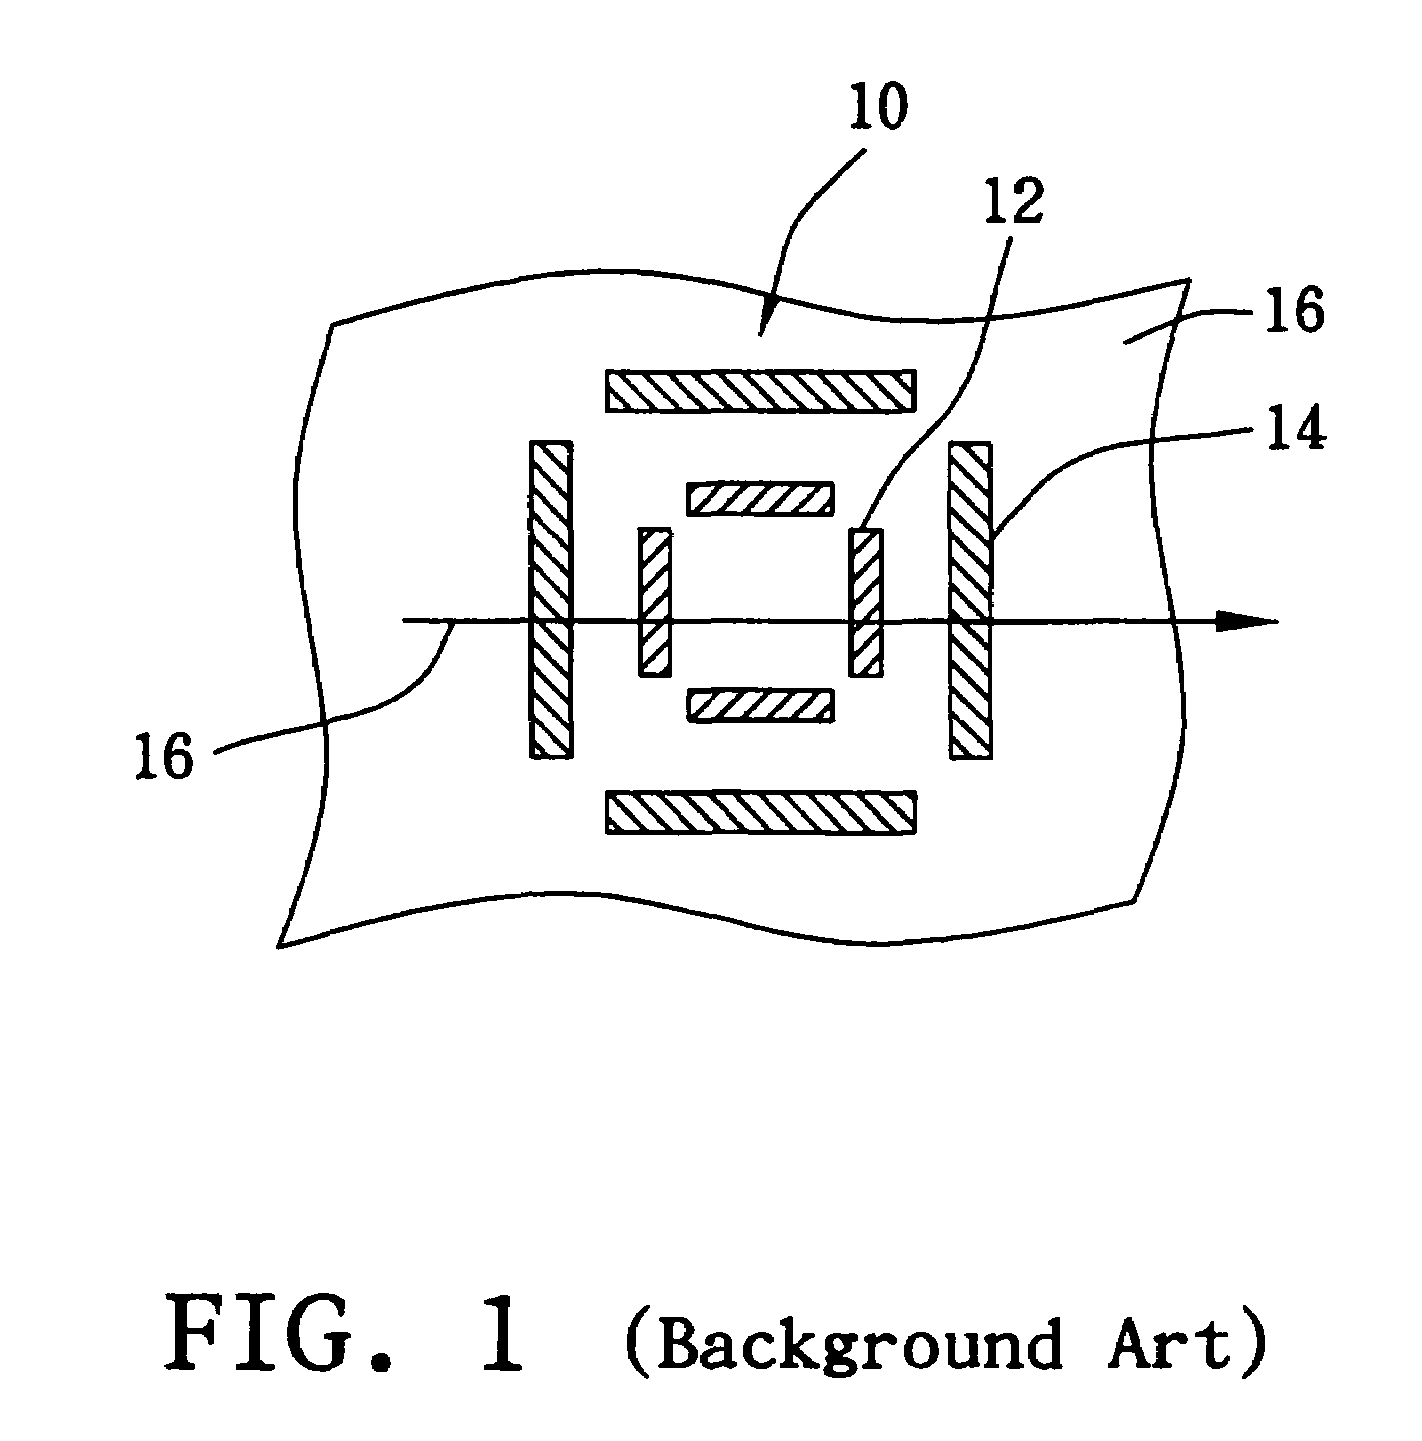 Overlay mark for aligning different layers on a semiconductor wafer